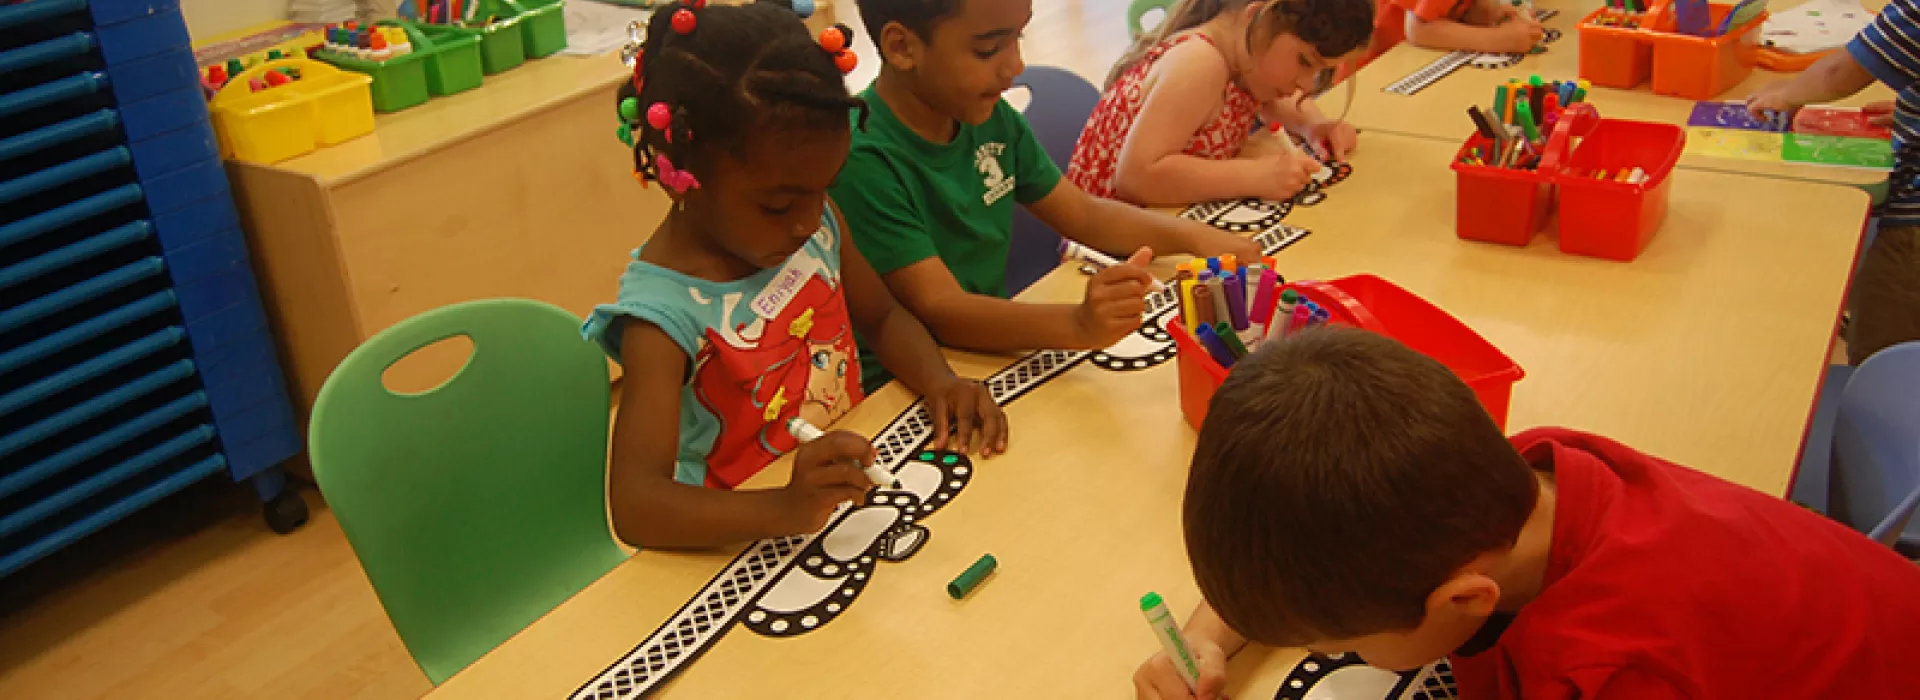 Child Care Programs and Services - YMCA